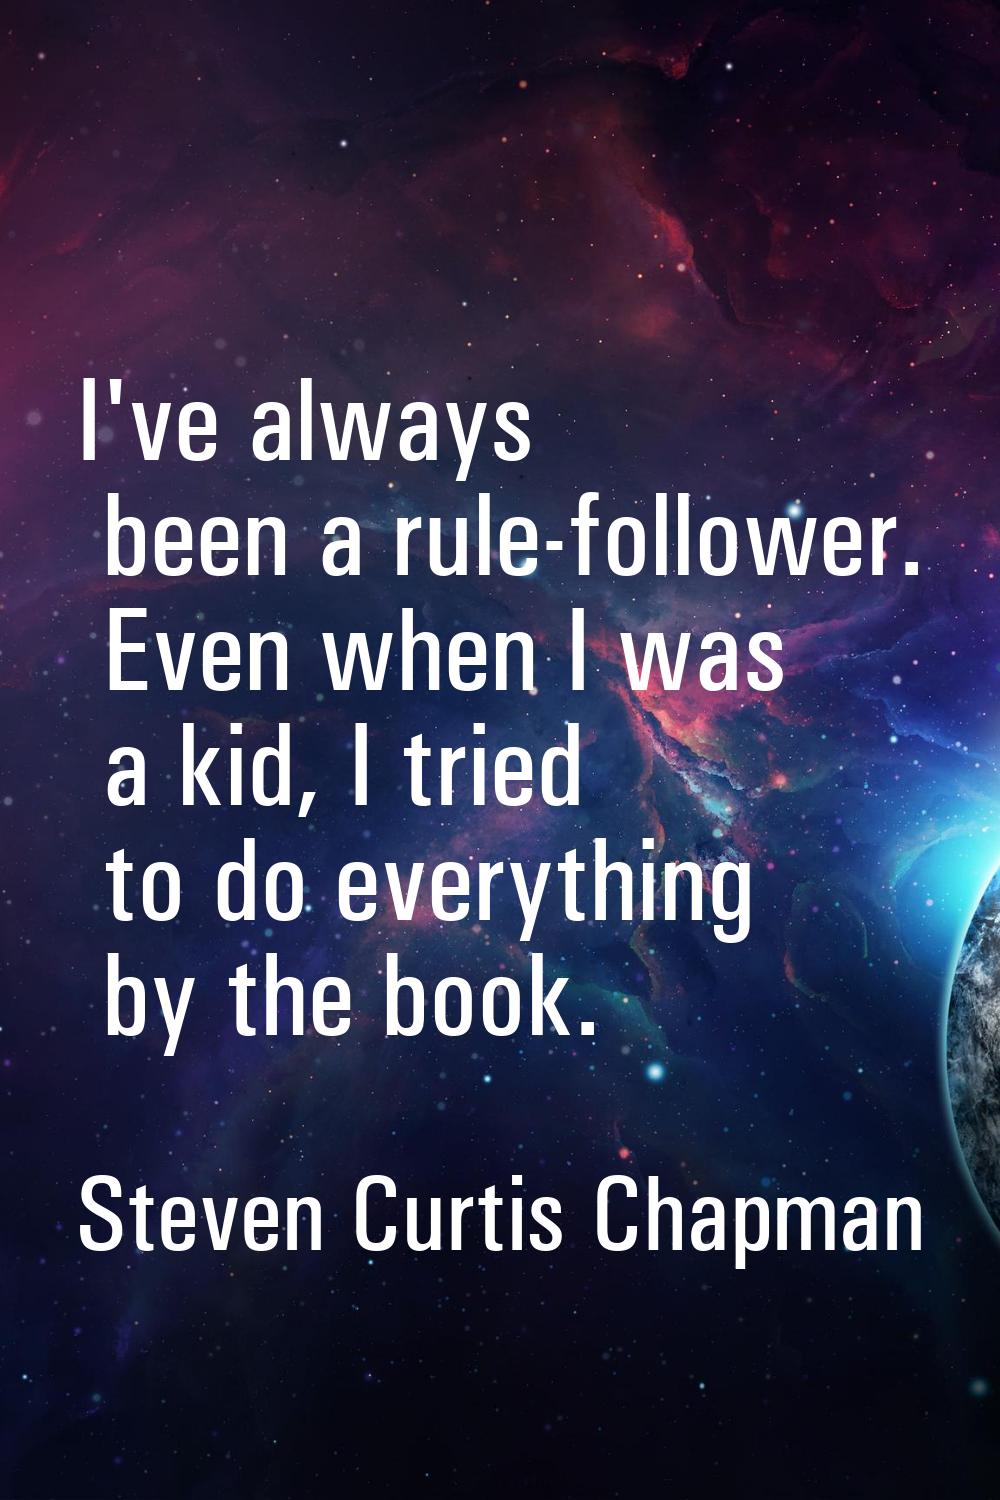 I've always been a rule-follower. Even when I was a kid, I tried to do everything by the book.